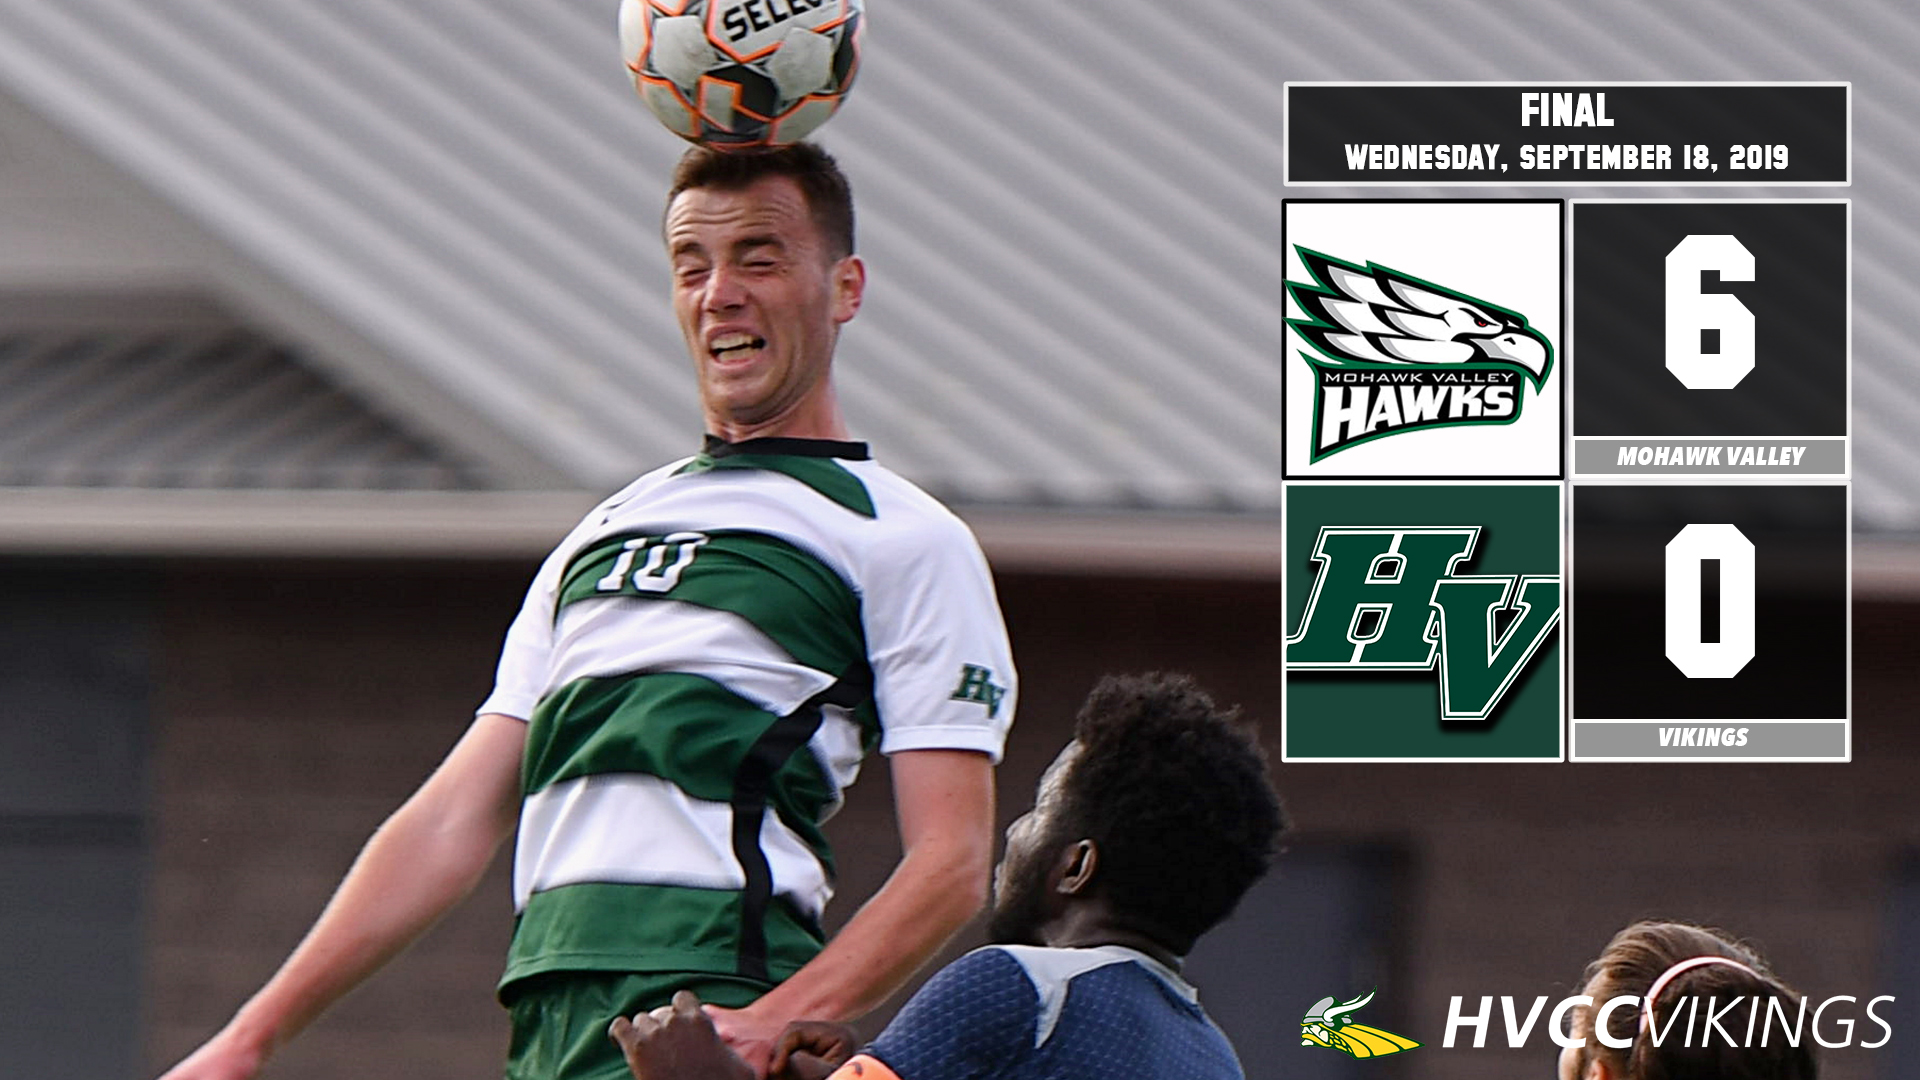 Men's soccer defeated 6-0 at Mohawk Valley on 9/18/2019